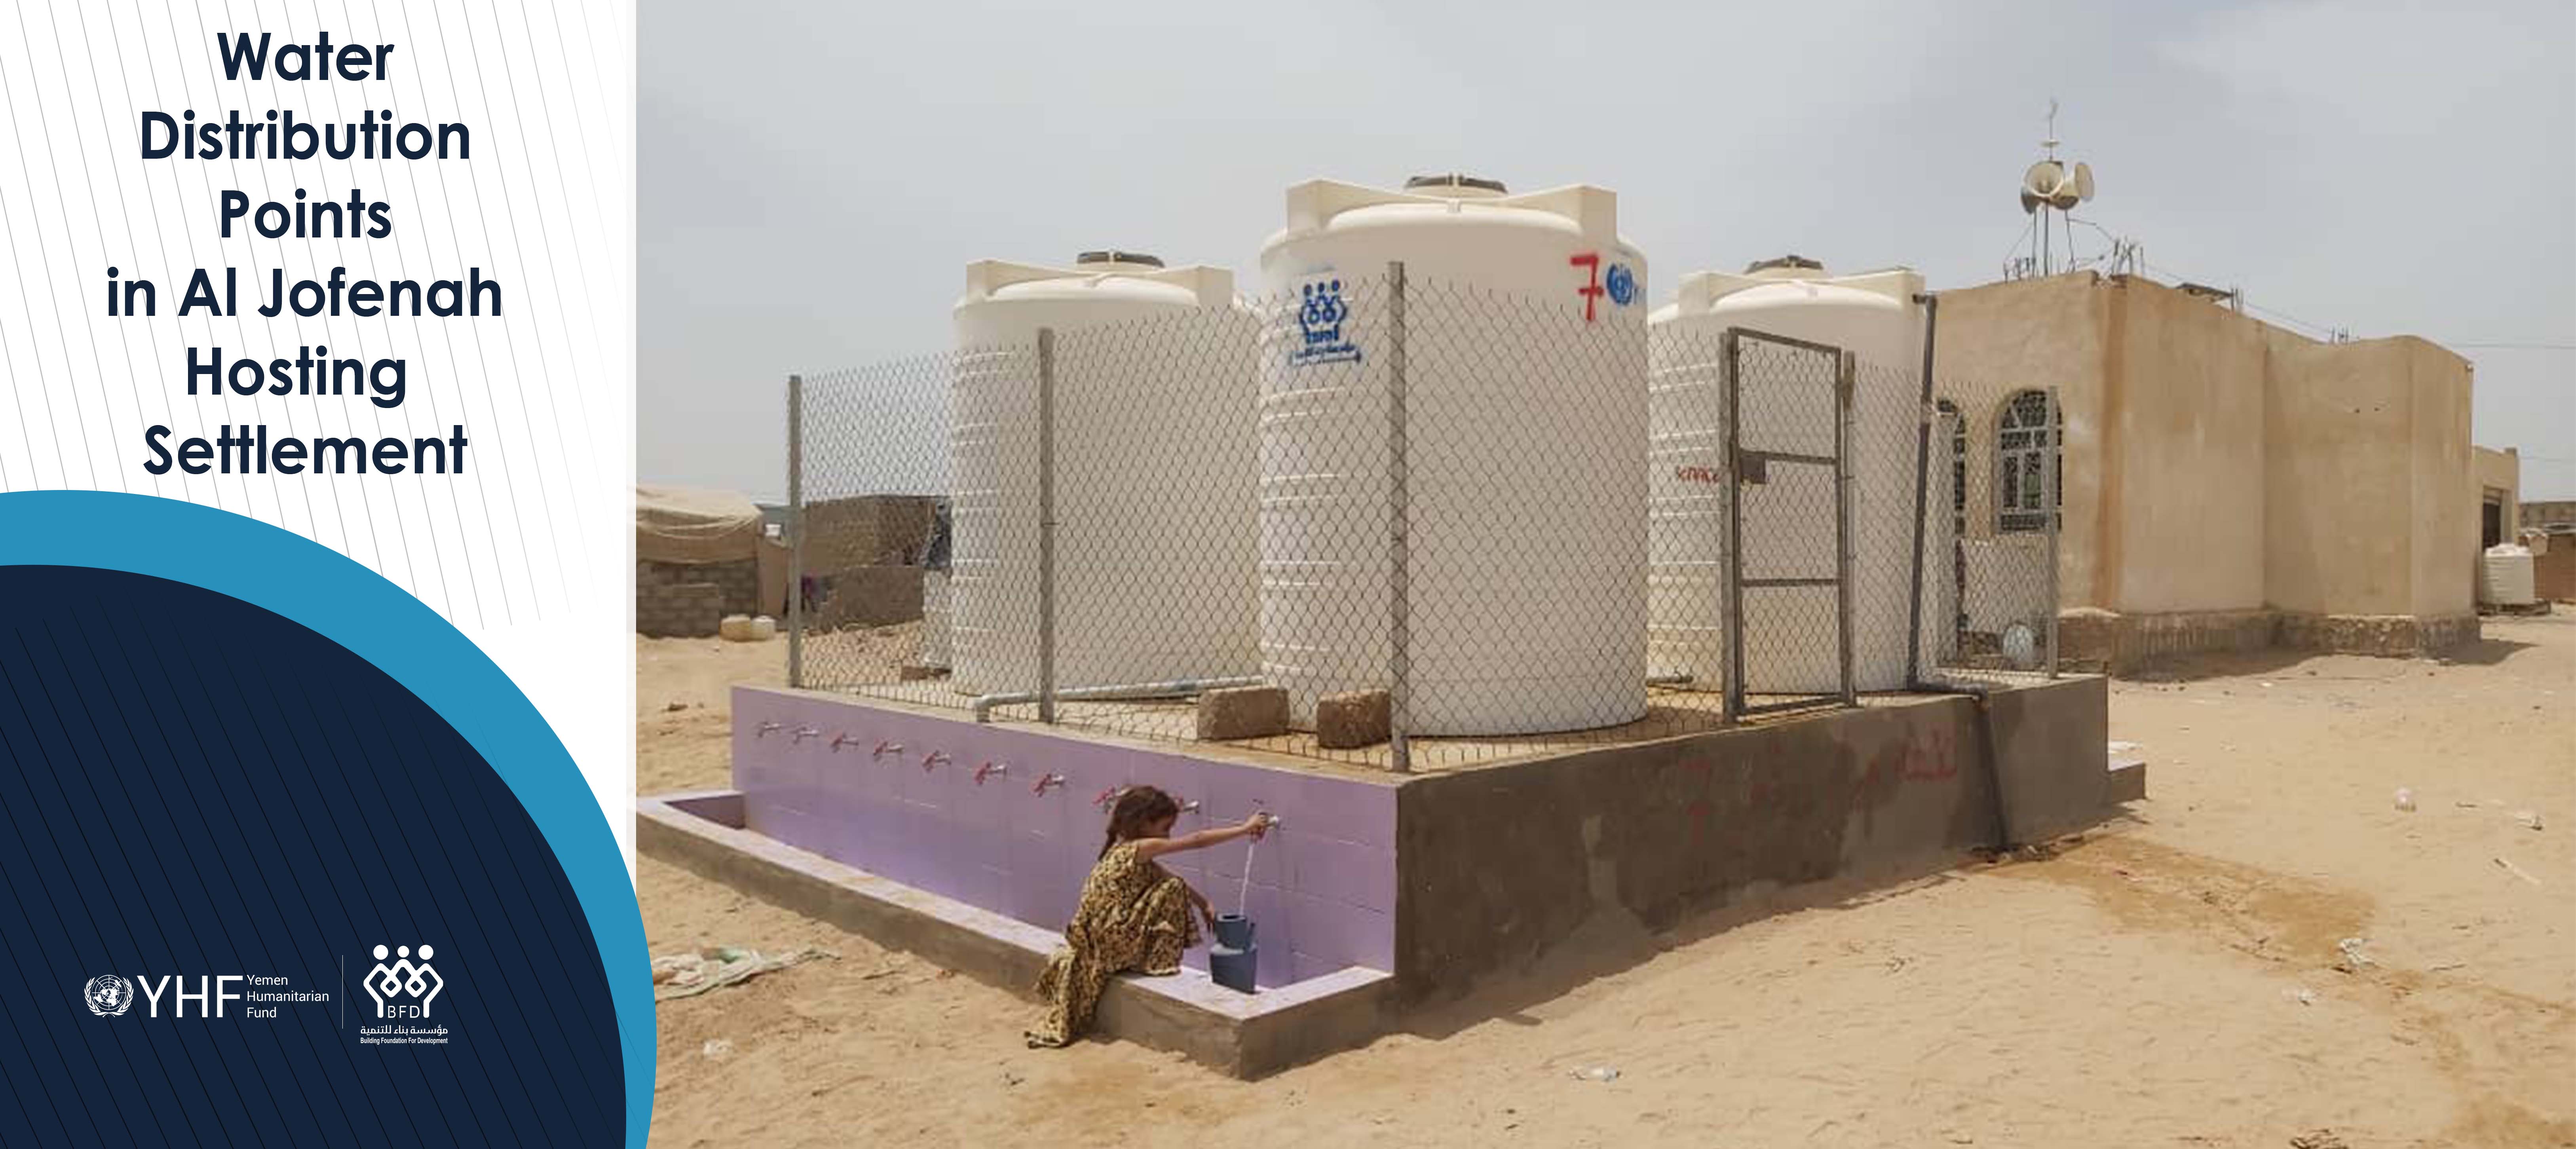 Providing Safe and Sustainable Water for the IDPs, residing in Al Jofenah Hosting Settlement - Cover Image